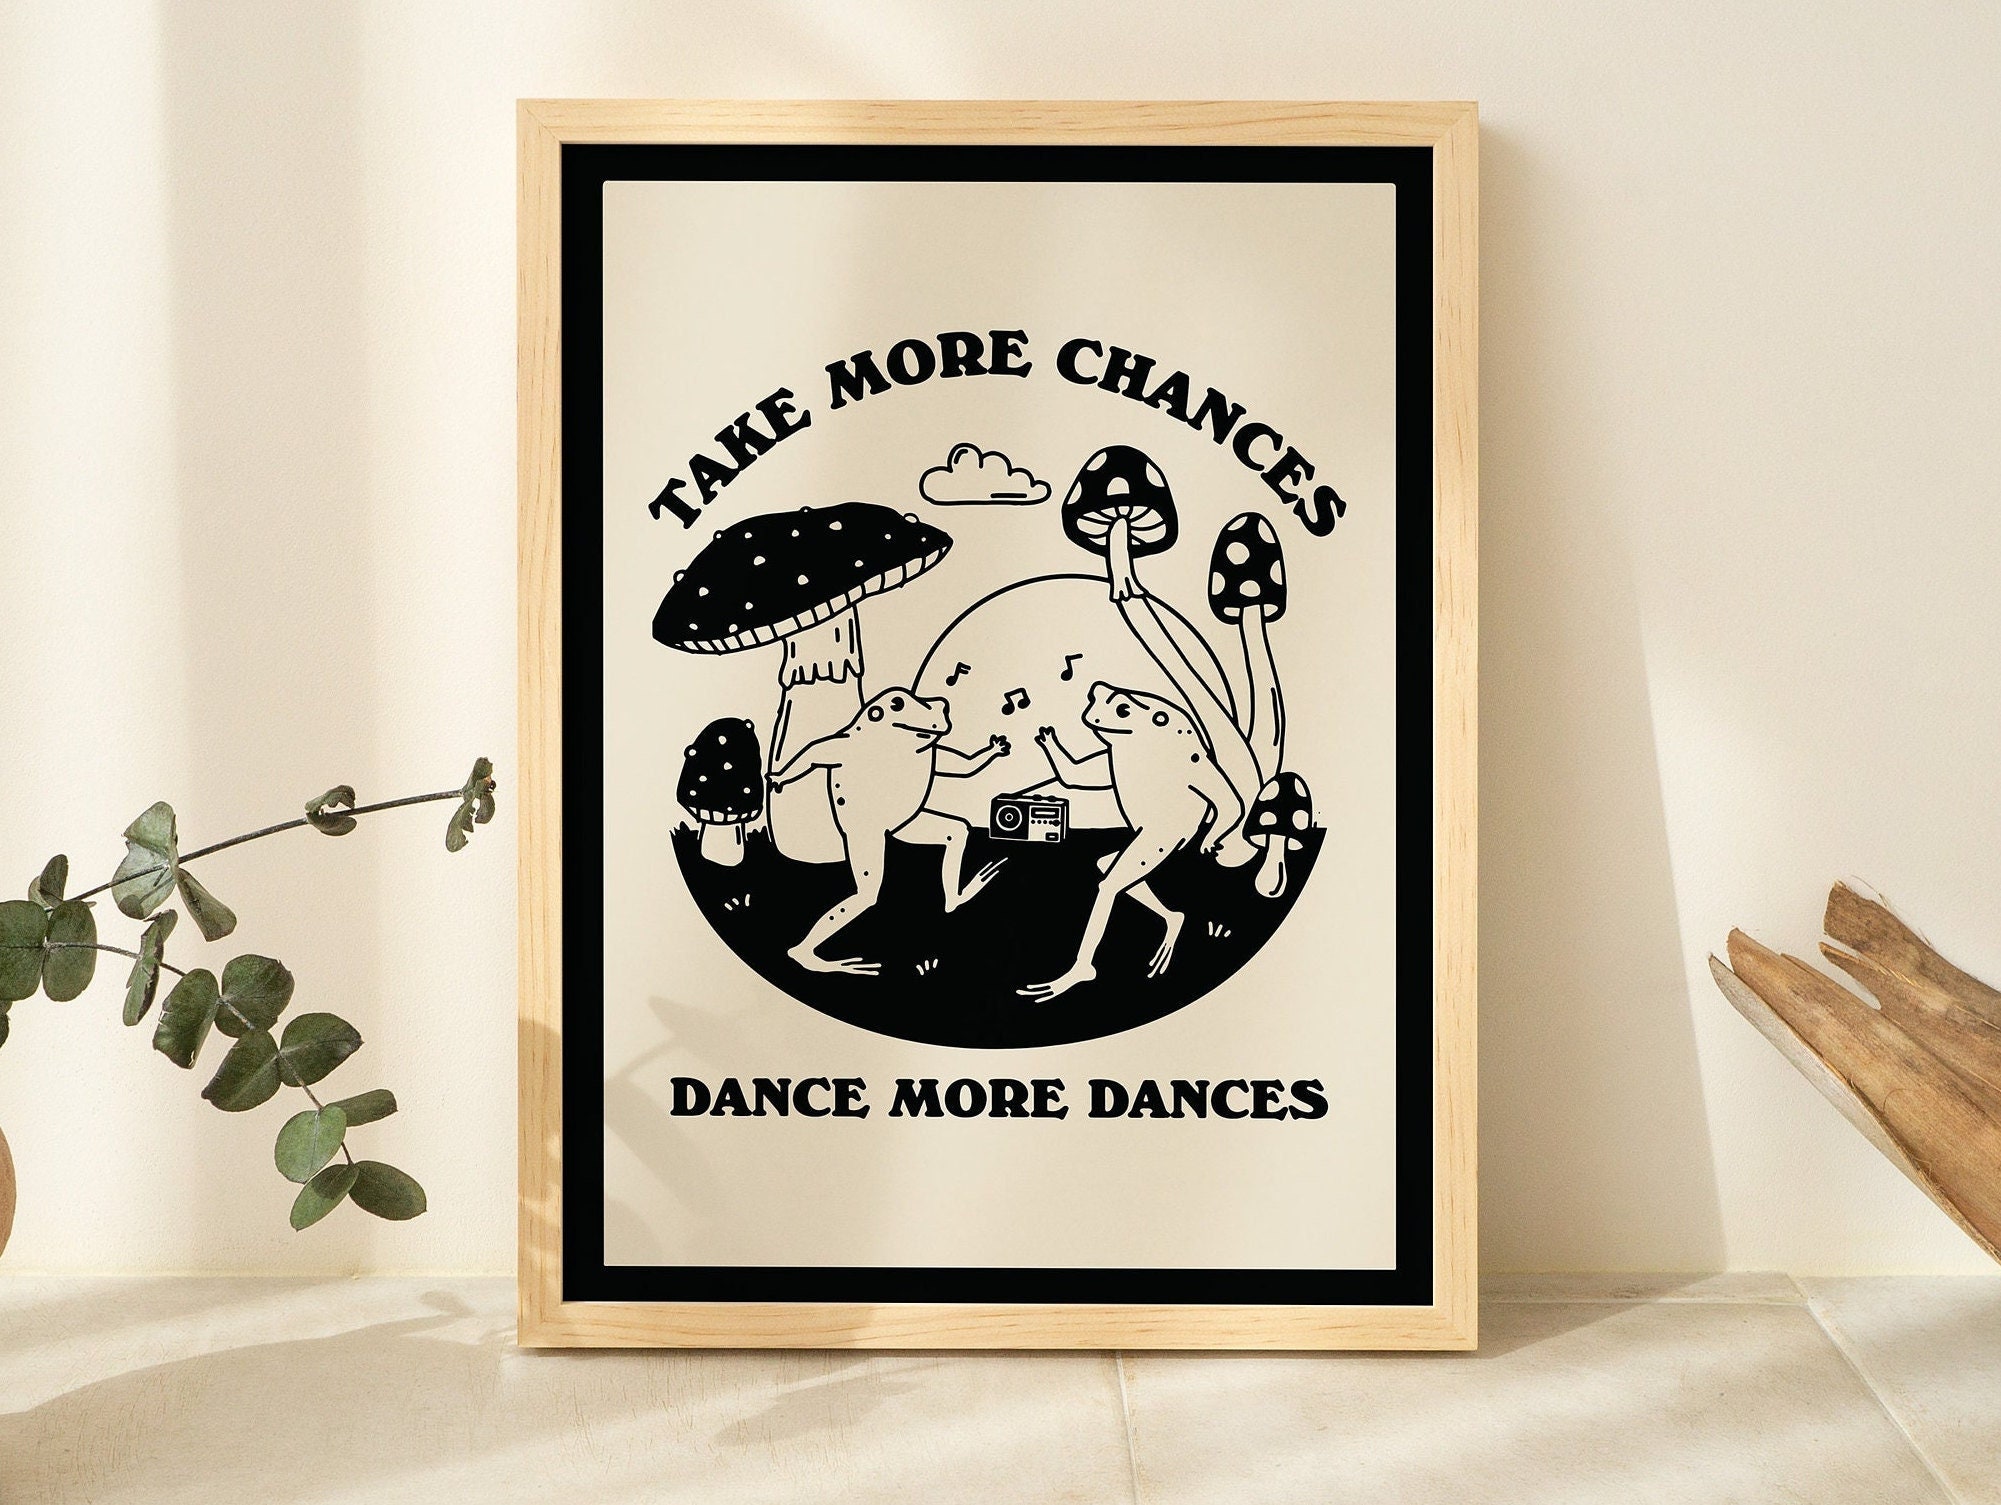 Discover Dancing Frogs Retro Poster